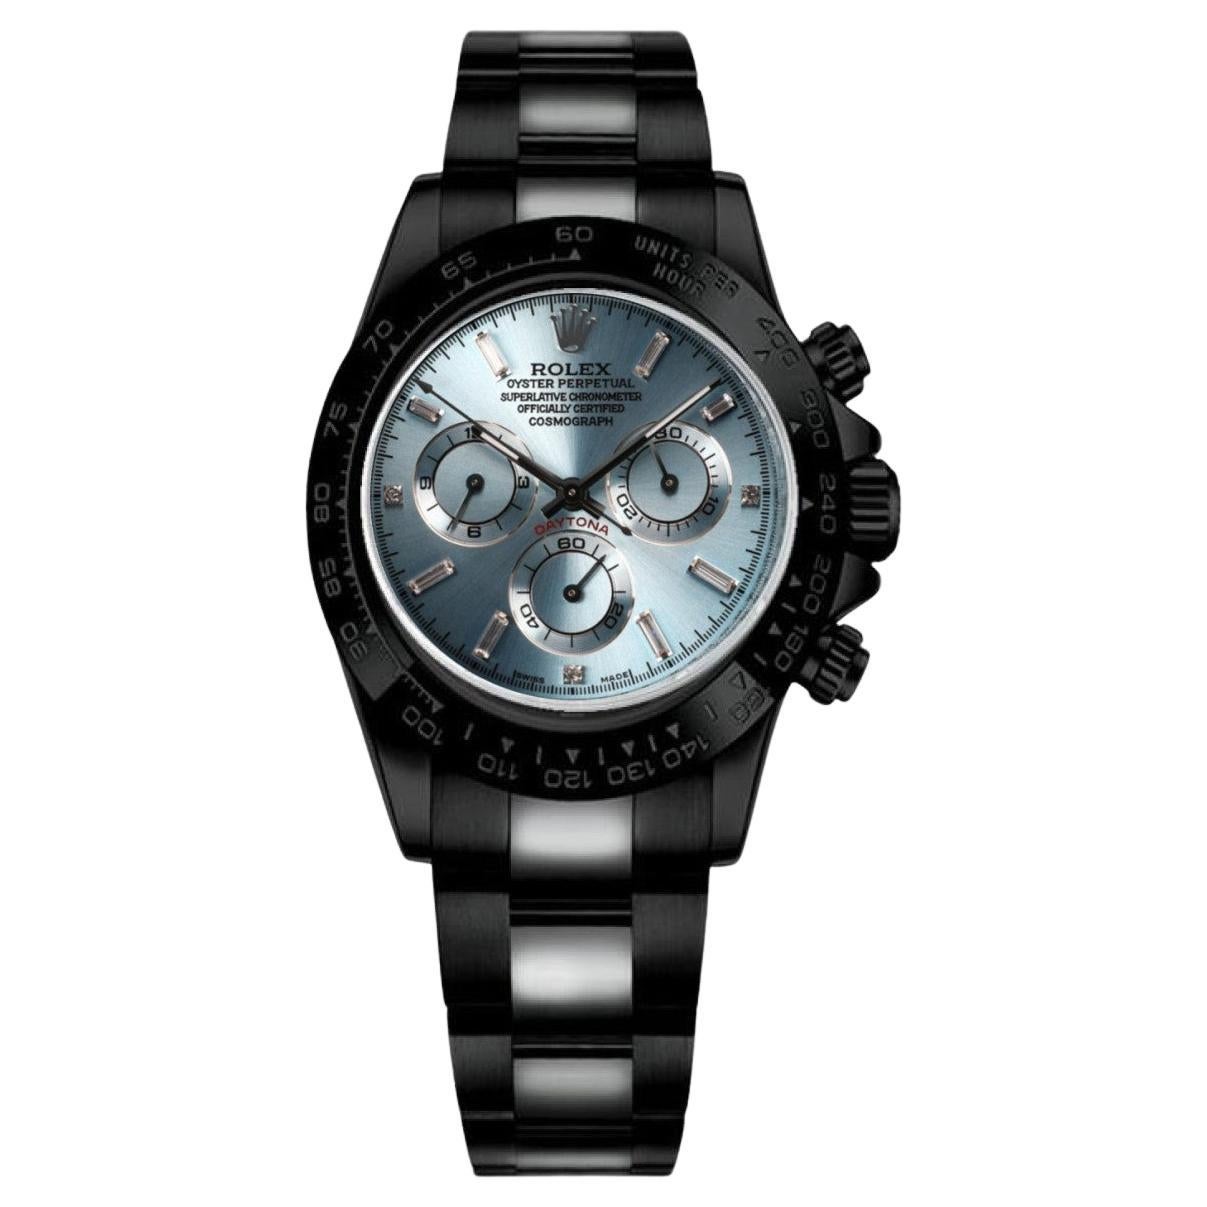 Rolex Oyster Perpetual Cosmograph Daytona Black PVD/DLC Coated Watch 116523  For Sale at 1stDibs